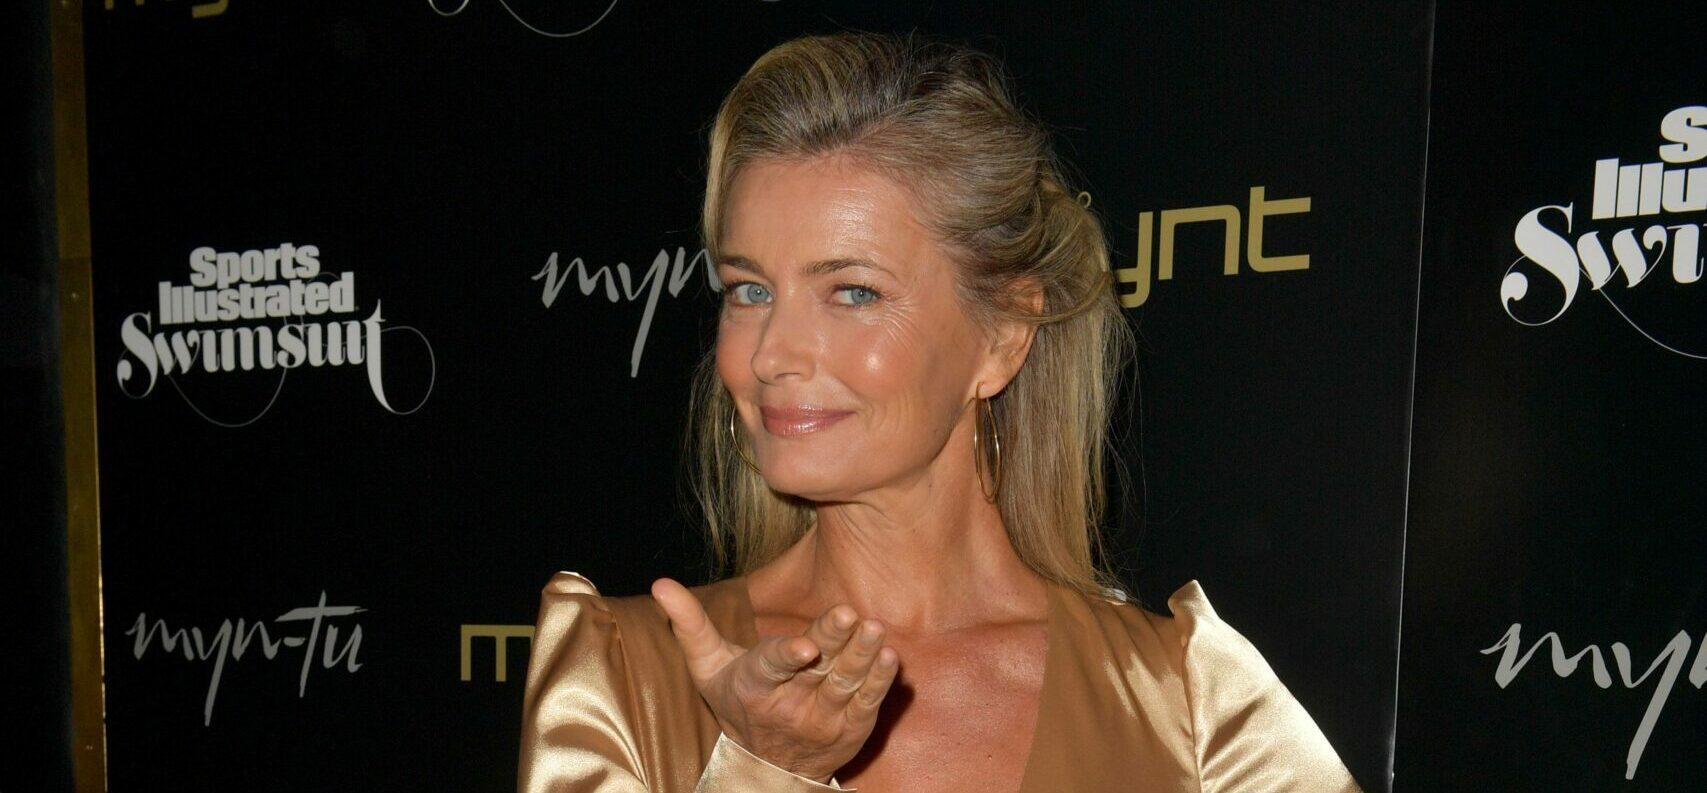 Paulina Porizkova Opens Up On Her ‘Scary’ and ‘Exhilarating’ New Relationship